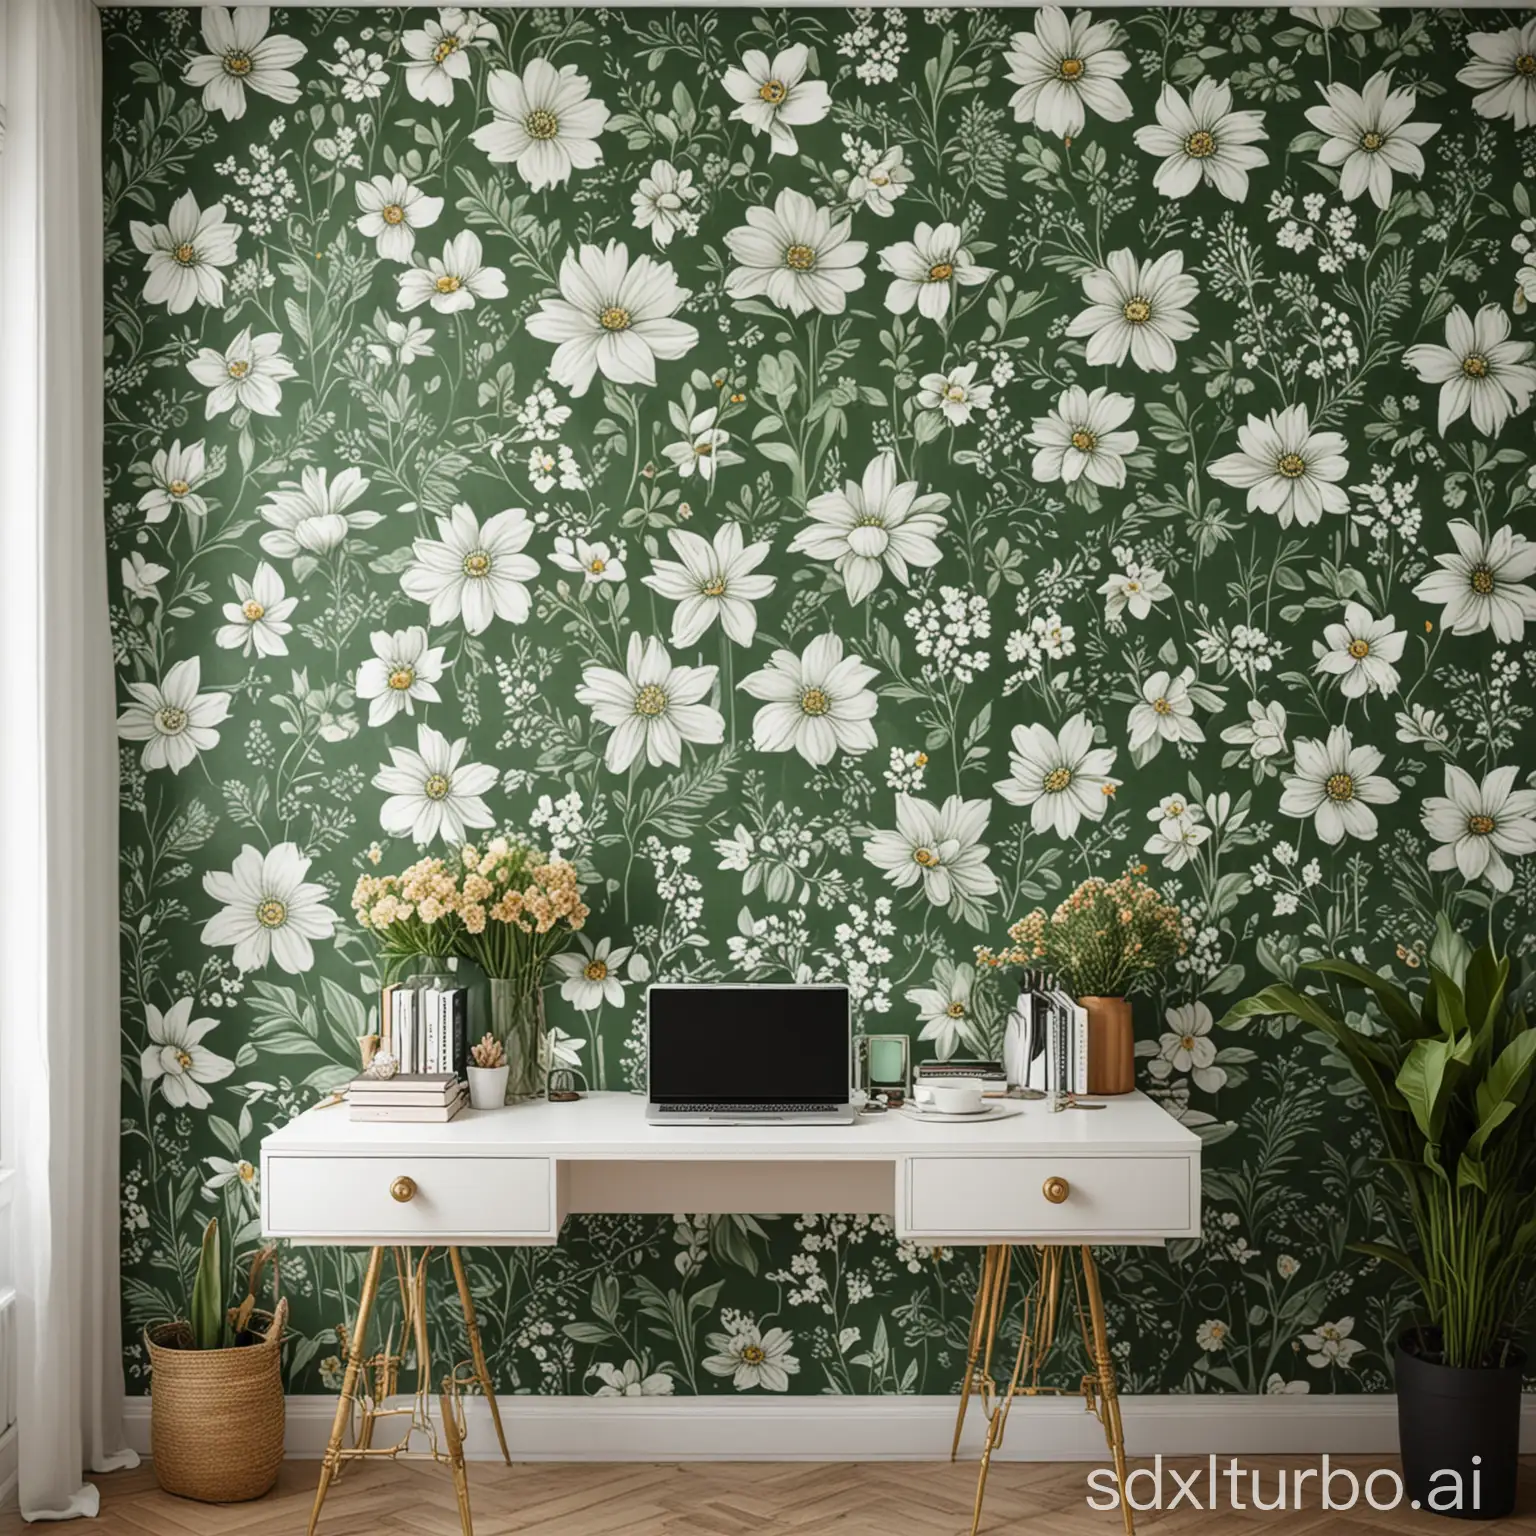 Stylish-Green-and-White-Patterned-Wall-with-Floral-Desk-Decor